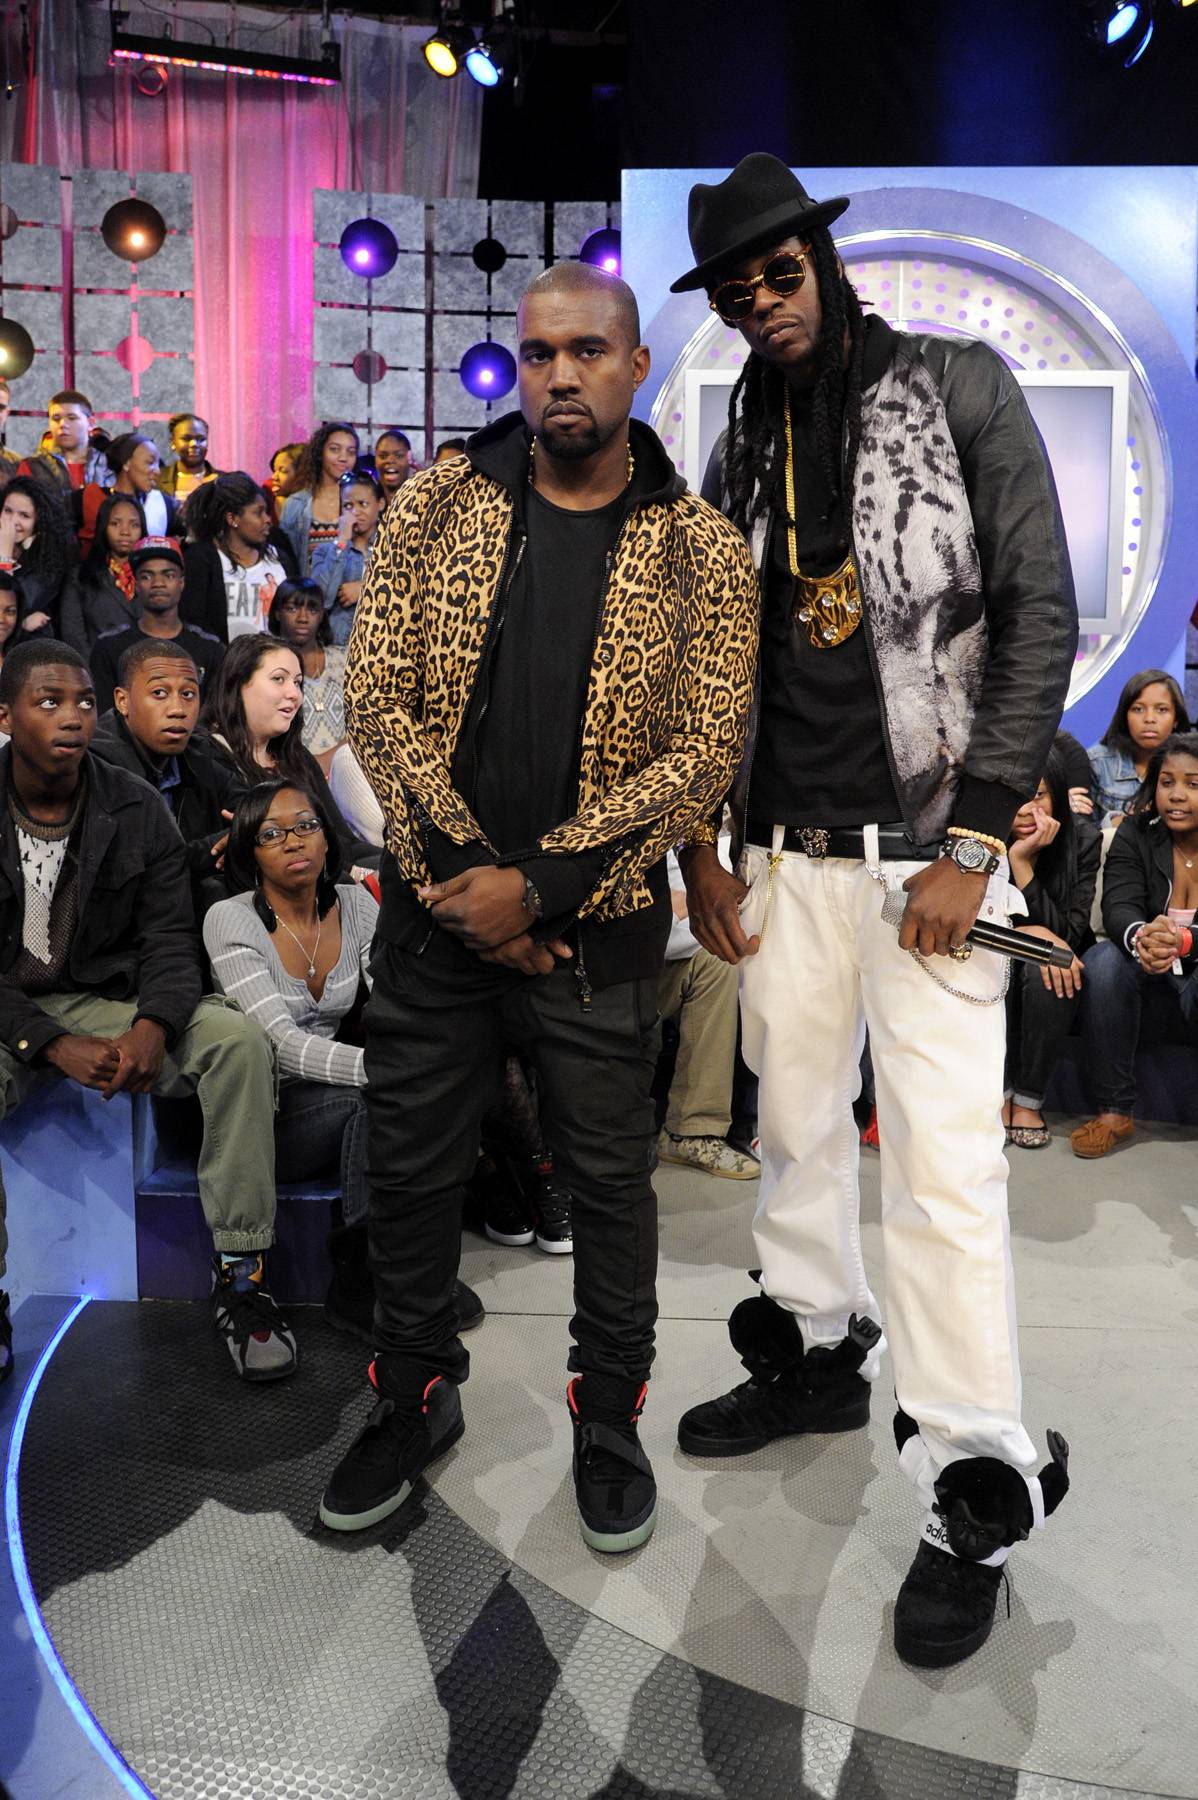 2 Dope - Kanye West and 2 Chainz at 106 &amp; Park, April 9, 2012. (photo: John Ricard / BET)